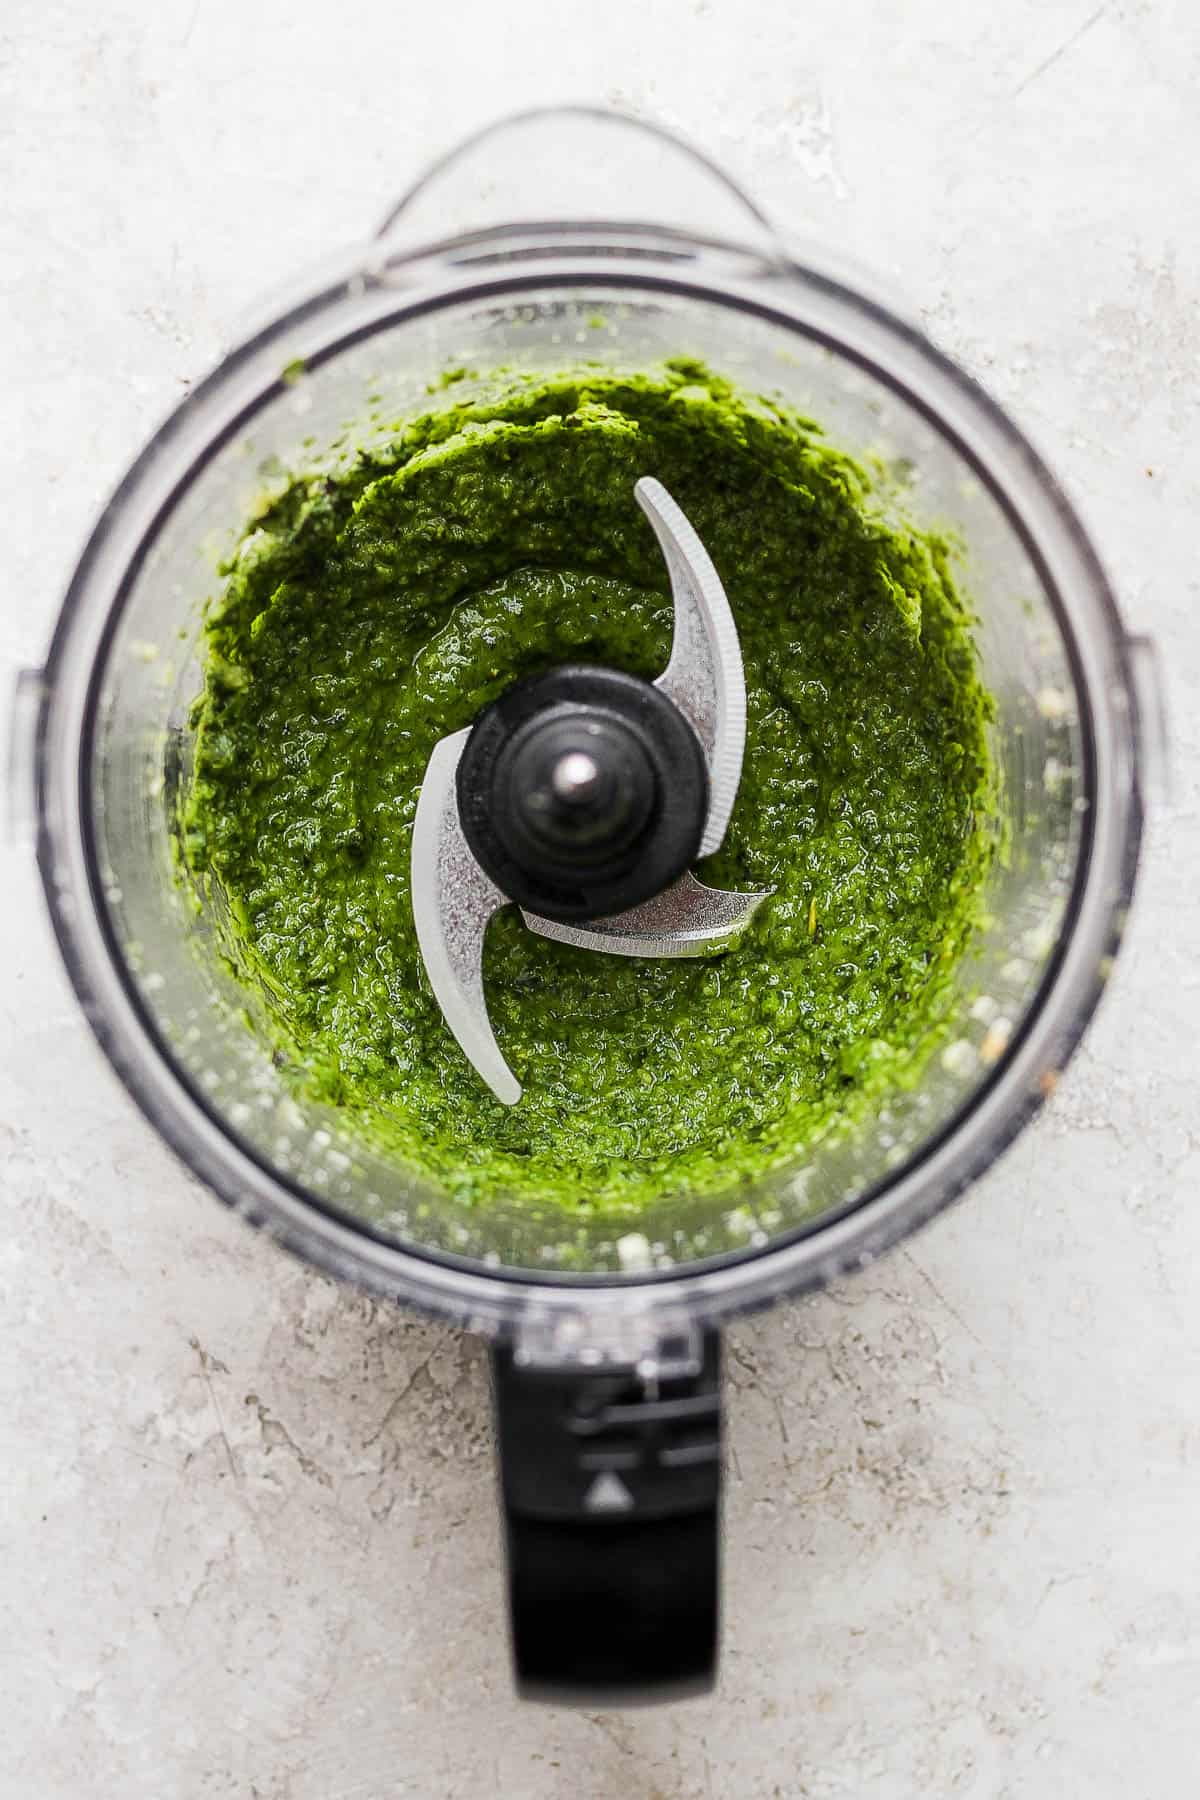 A fully blended pesto in the food processor.